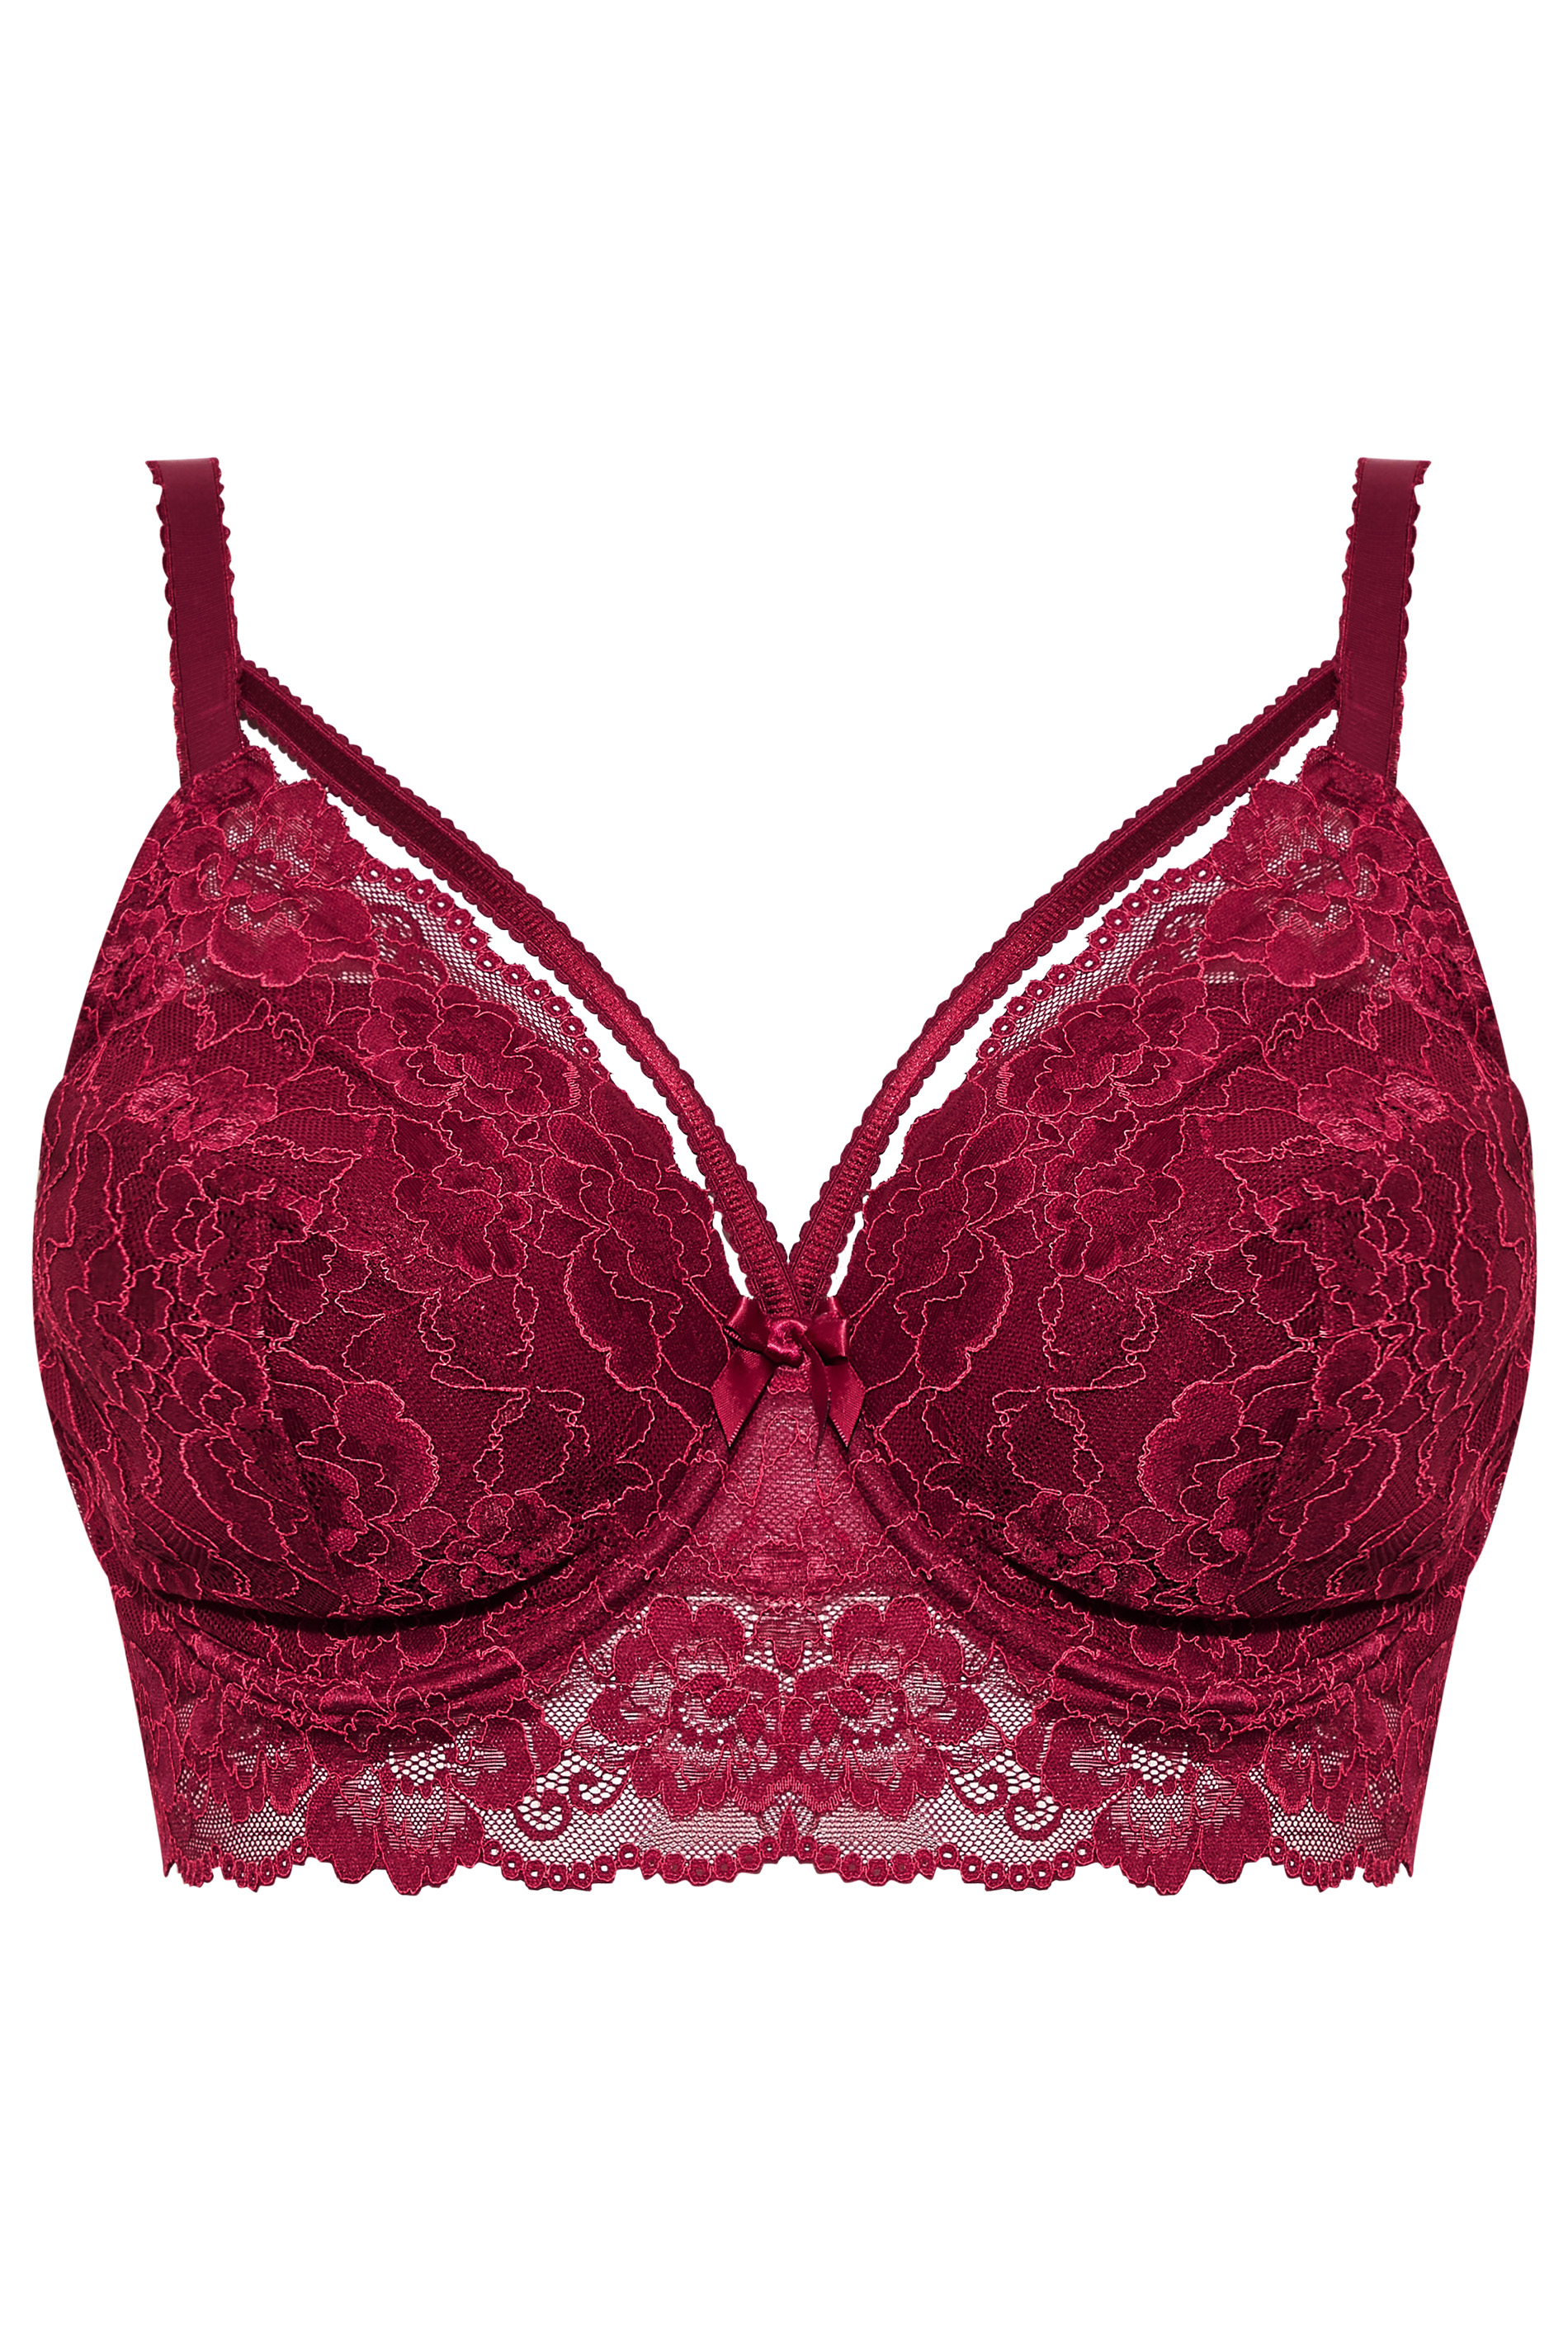 Plus Size Burgundy Red Lace Strap Detail Padded Underwired Longline Bra